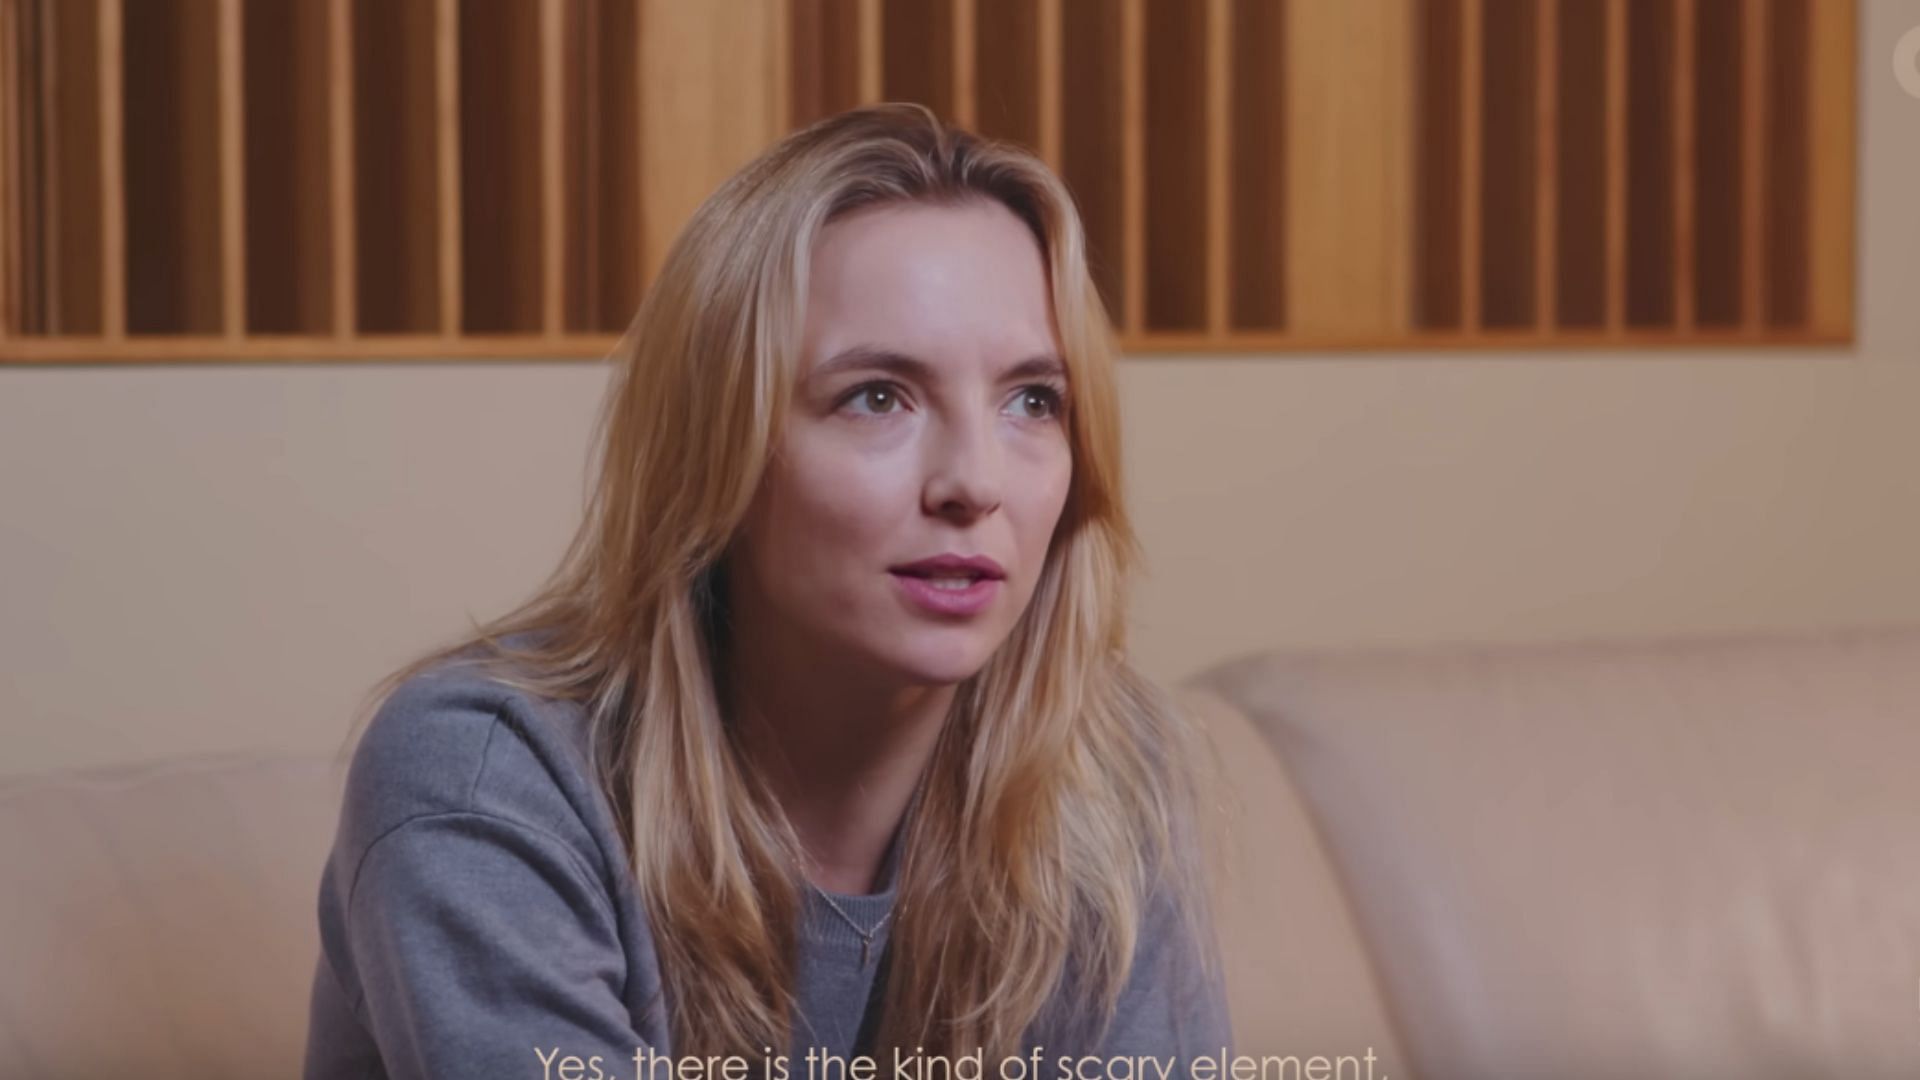 Jodie Comer takes on the role of Emily Hartwood in the game (Image via YouTube/ PlayStation)